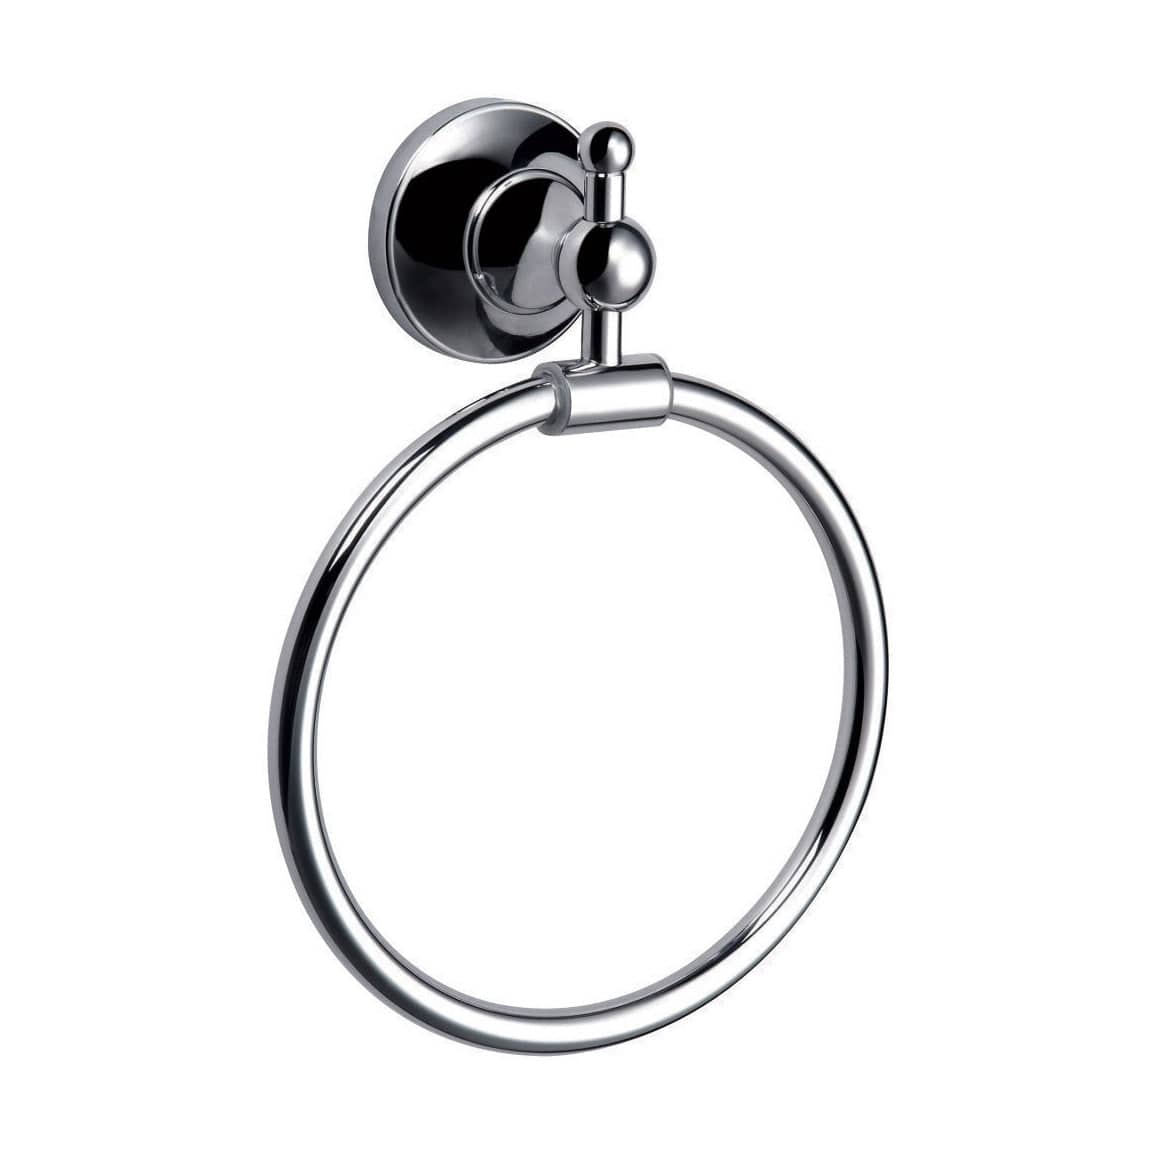 Shop Bathroom Copper Chrome Plated Towel Ring Holder - 7360 | Buy Online at Supply Master Accra, Ghana Bathroom Accessories Buy Tools hardware Building materials